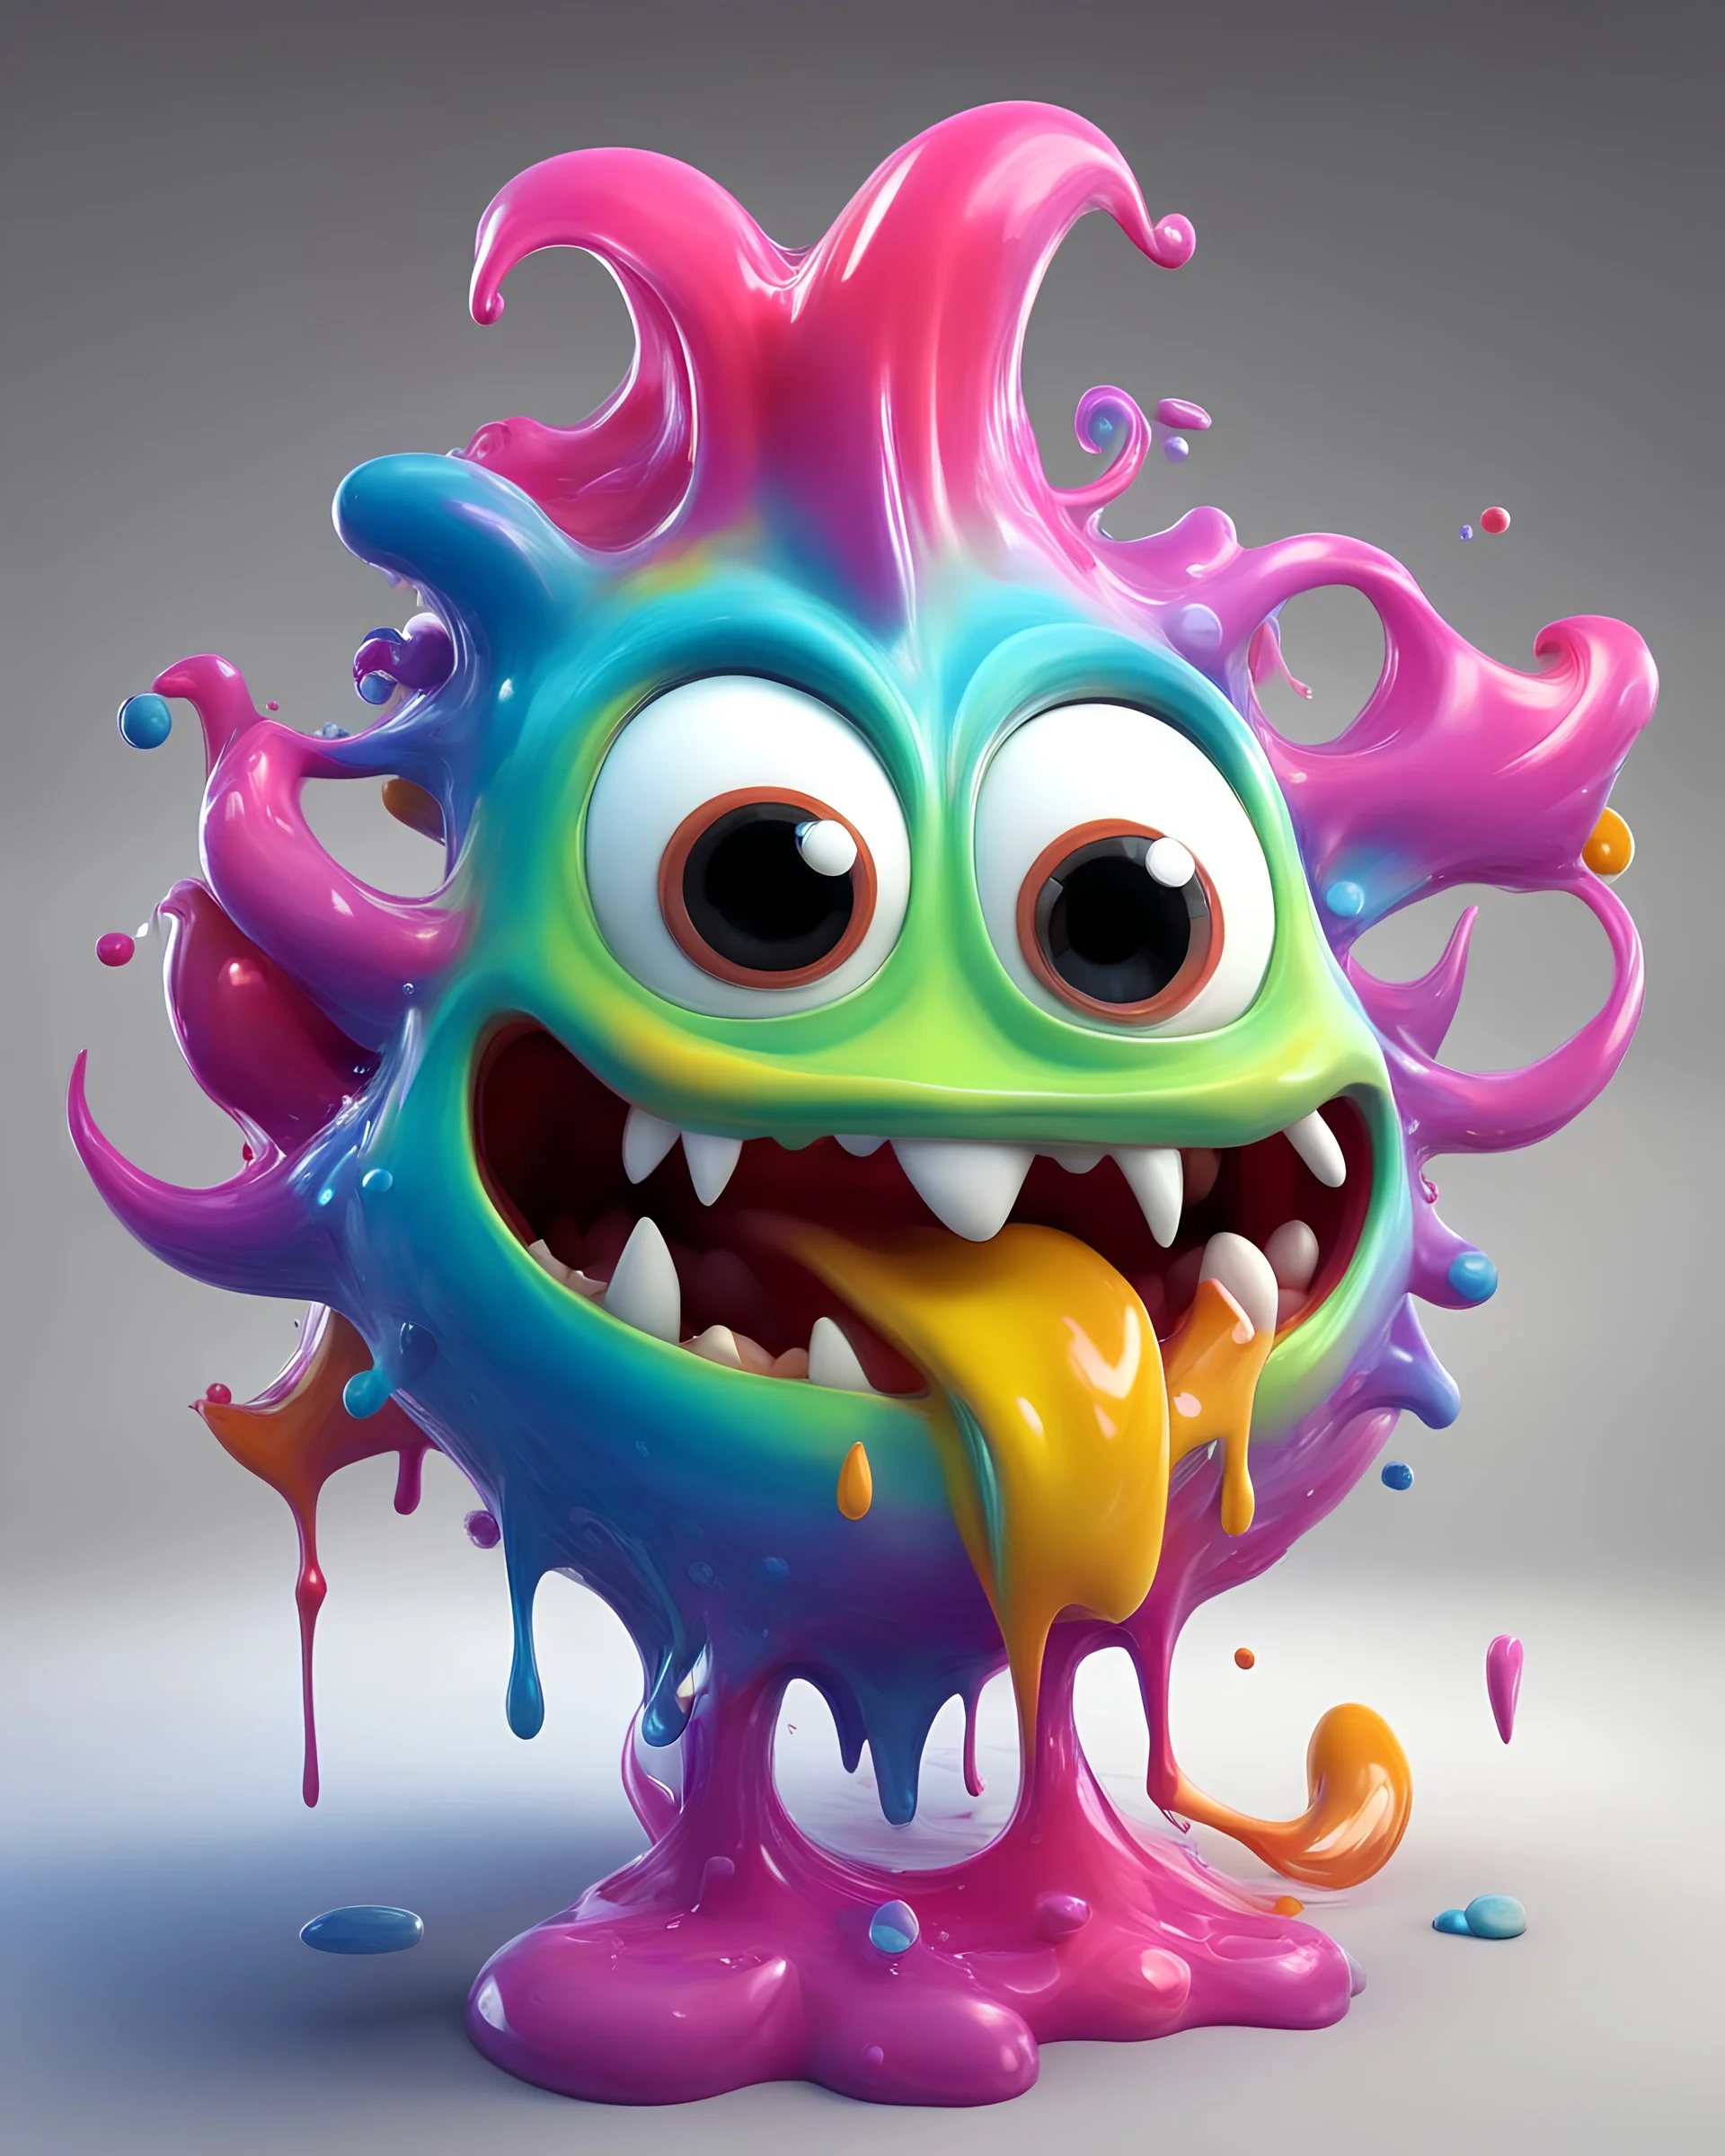 3D Pixar style animation, cute, melting monster character, (pixarstyle:1.3) whimsy character, fluid form, bonkers; jelly-like structure, amorphous, shape shifter, quirky character, playful colour spill, fun time, joyous art depicted in the style of (Buff Monster and Peter Bagge), photorealistic CGI art, vivid colour, covered in thick gooey fun vibrant colours, 3D graffiti art, thick and glossy, topped with lots of rainbow sprinkles, Maya modelling, Arnold rendering engine, sharp detail,